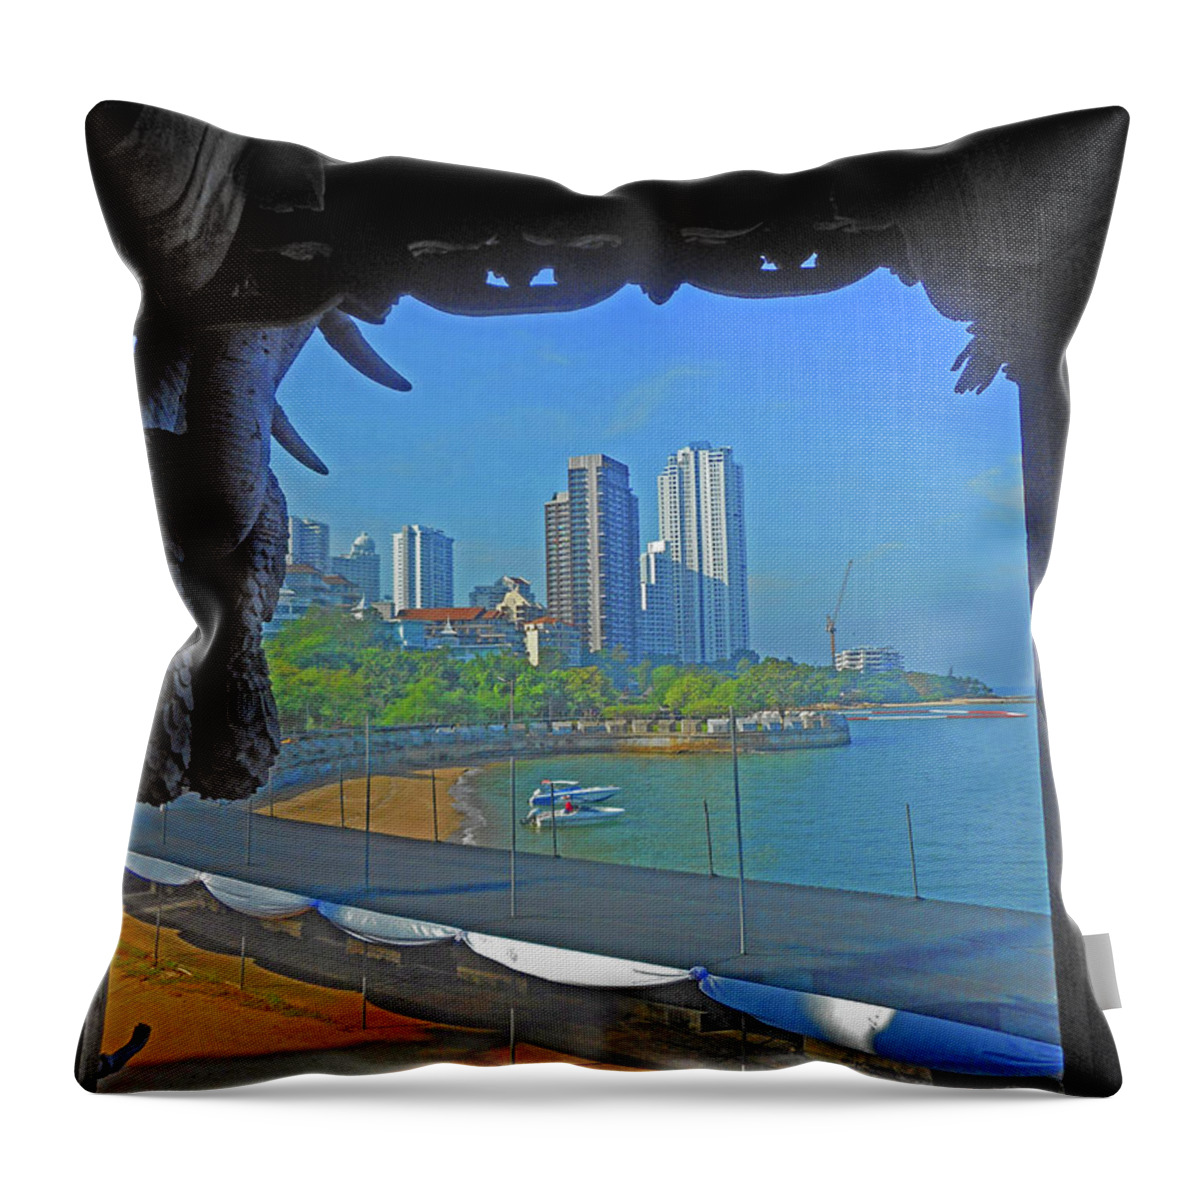  Laem Chabang Throw Pillow featuring the photograph Sanctuary Of Truth 10 by Ron Kandt